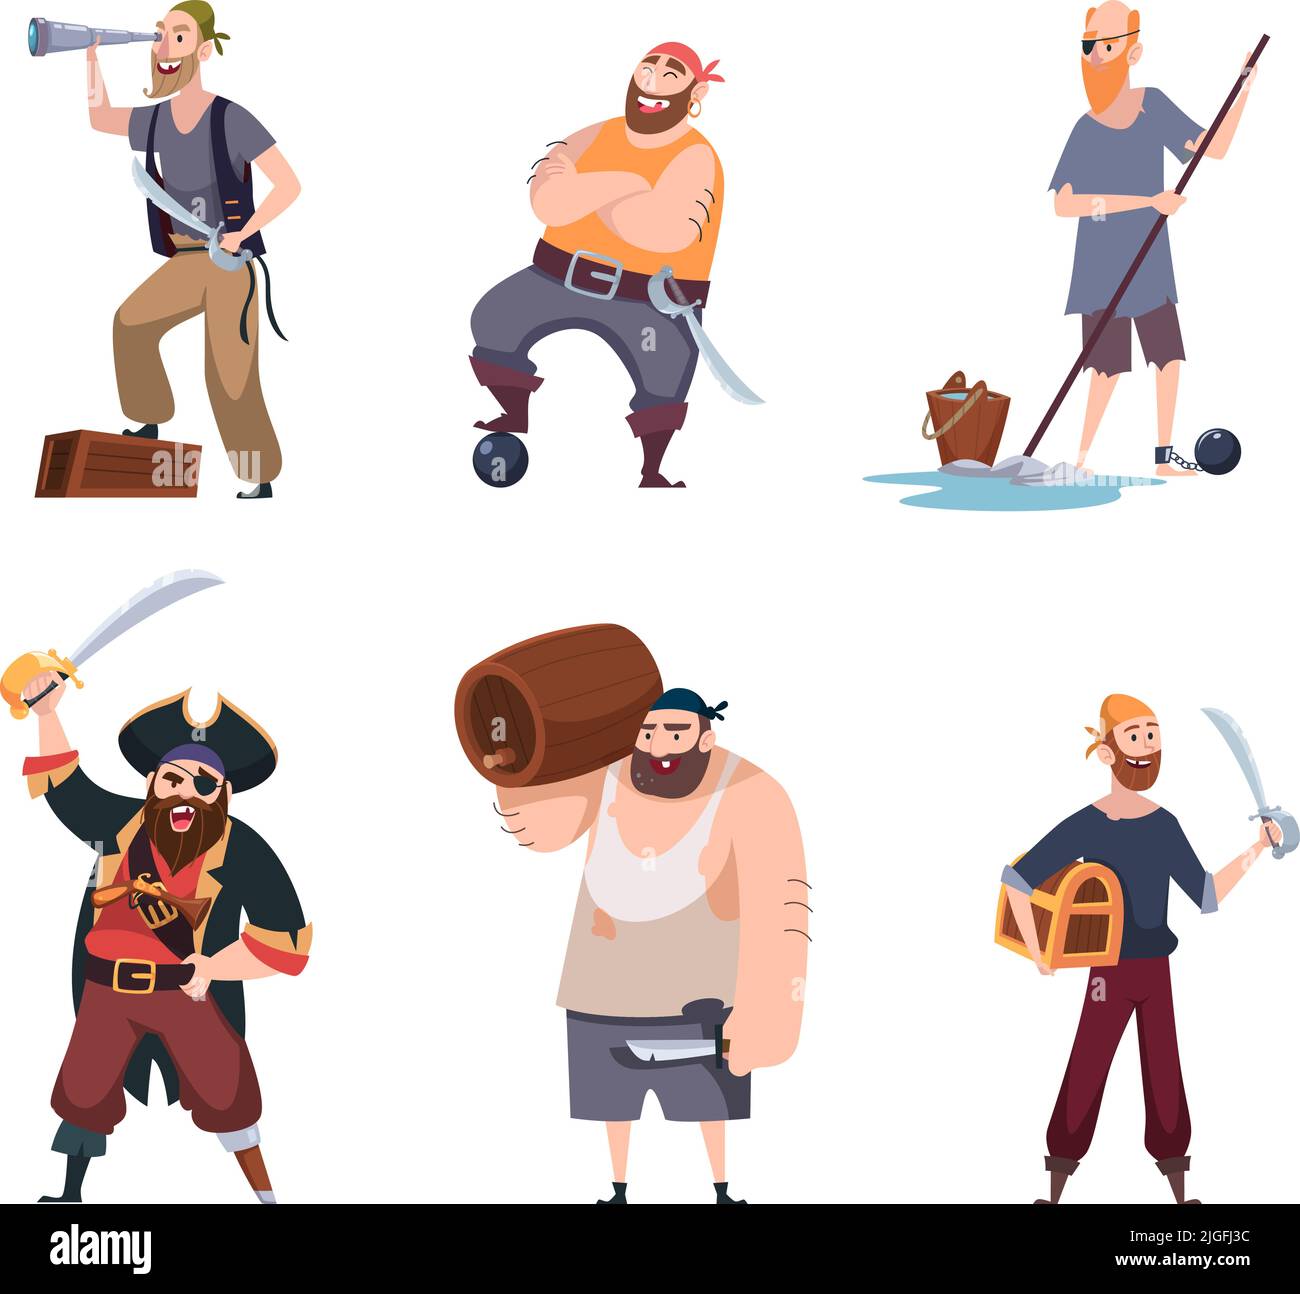 Pirates. Vintage aggressive sailors captain jack with rum and weapons exact vector pirate characters in action poses Stock Vector